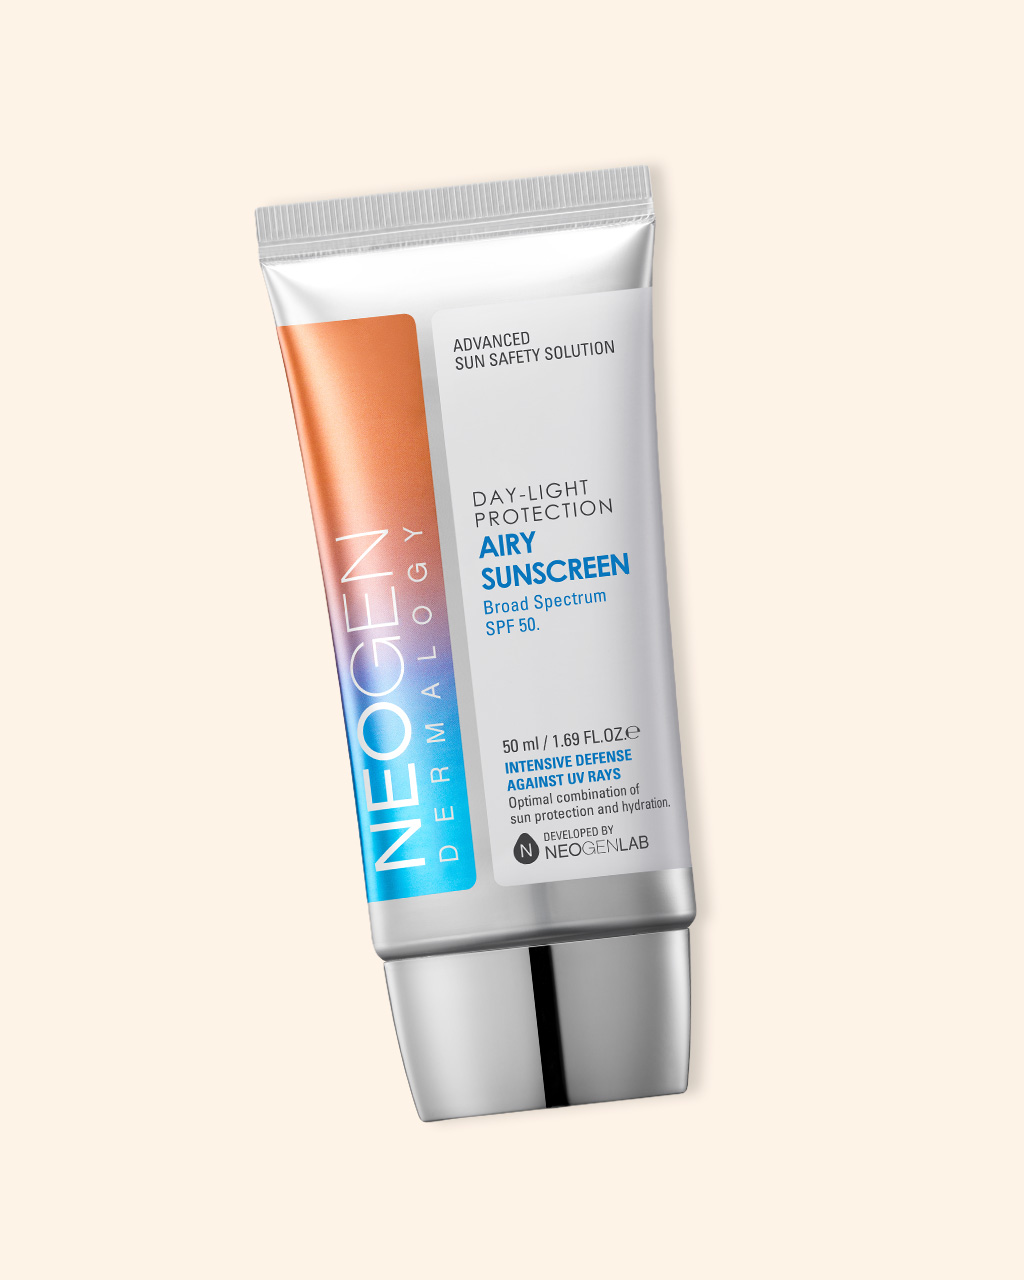 4.28-Soko-Glam-PDP-New-Curation-Neogen-DAY-LIGHT-PROTECTION-AIRYSUNSCREEN (1)